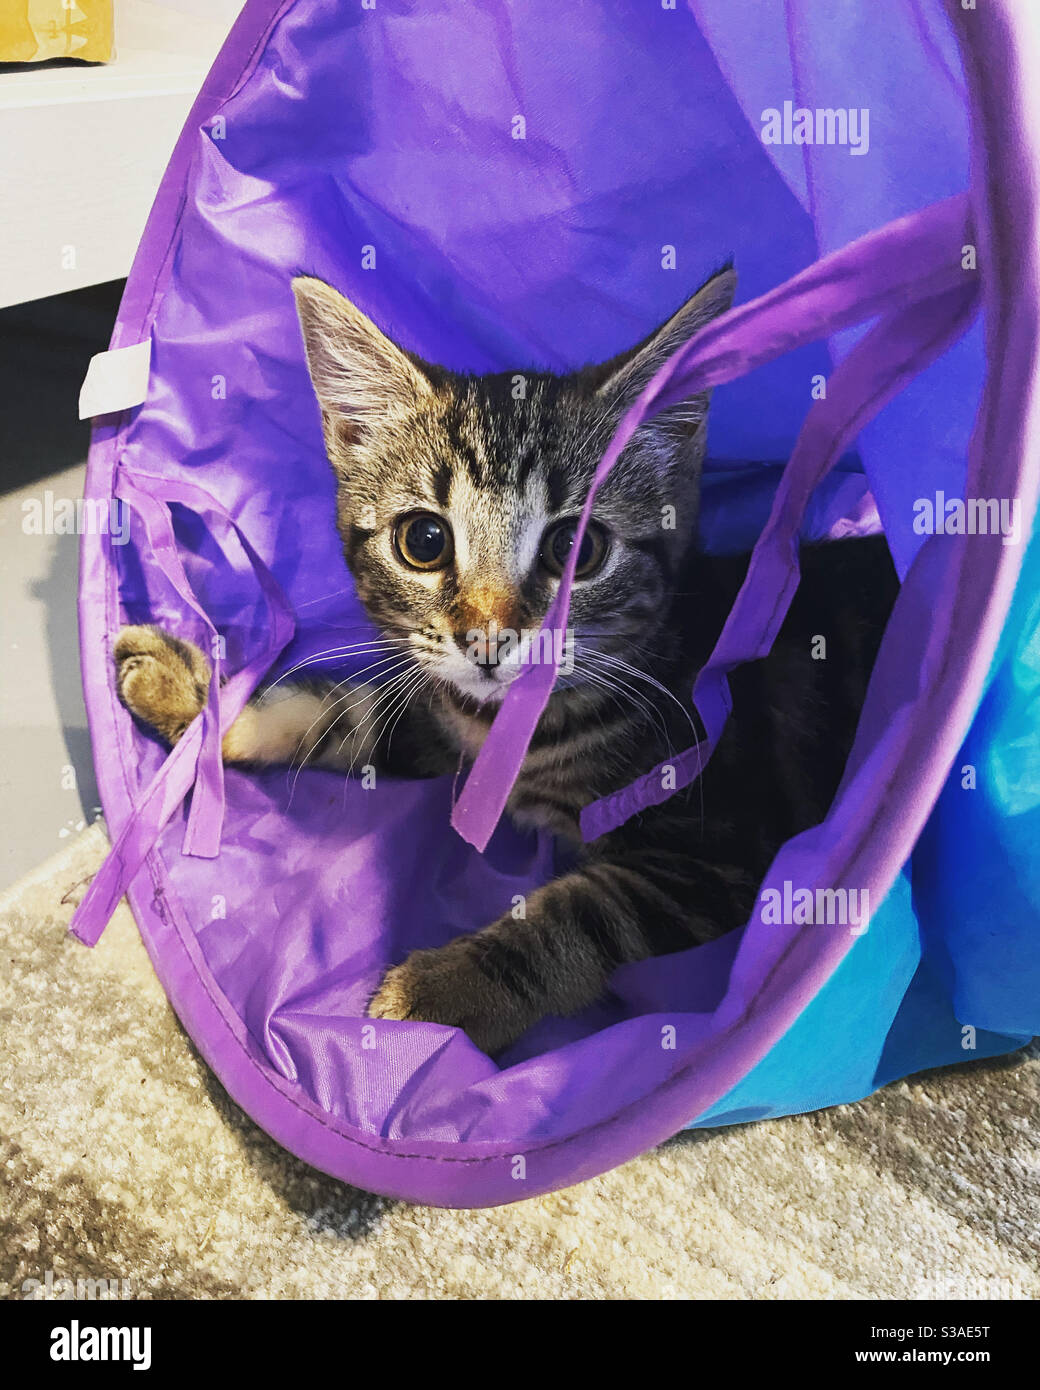 Kitten in a play tunnel Stock Photo